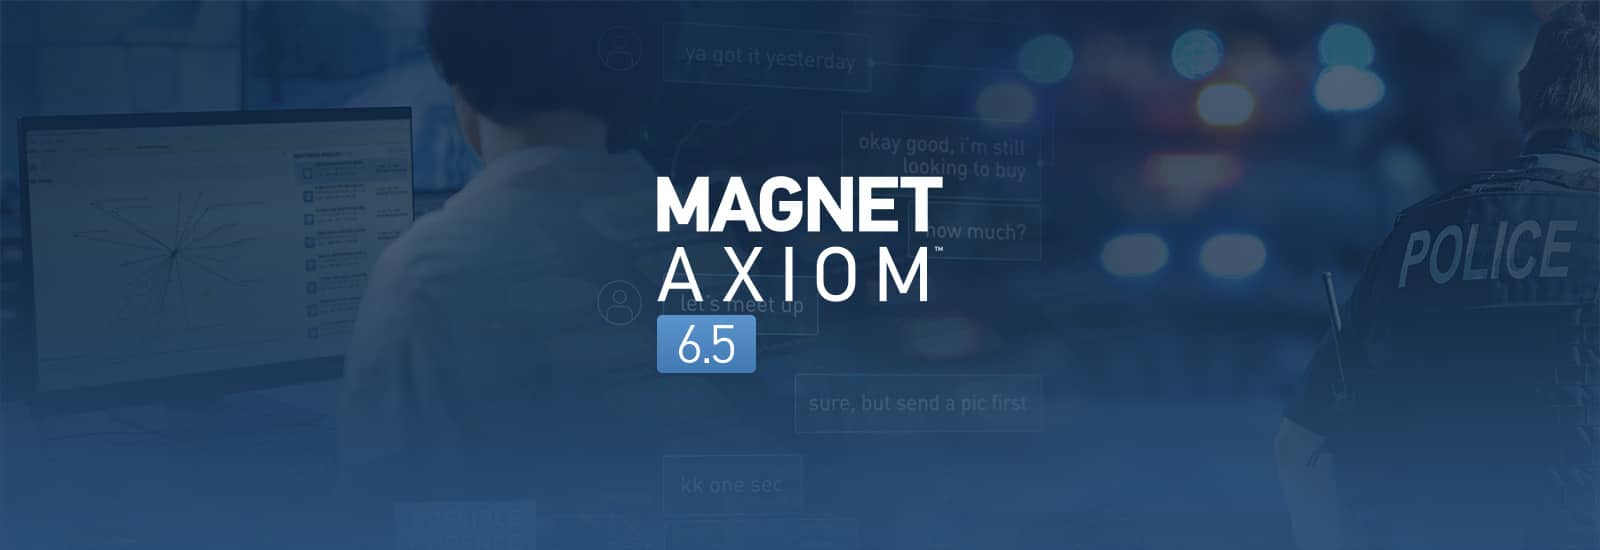 A decorative header for the Magnet AXIOM 6.5 release